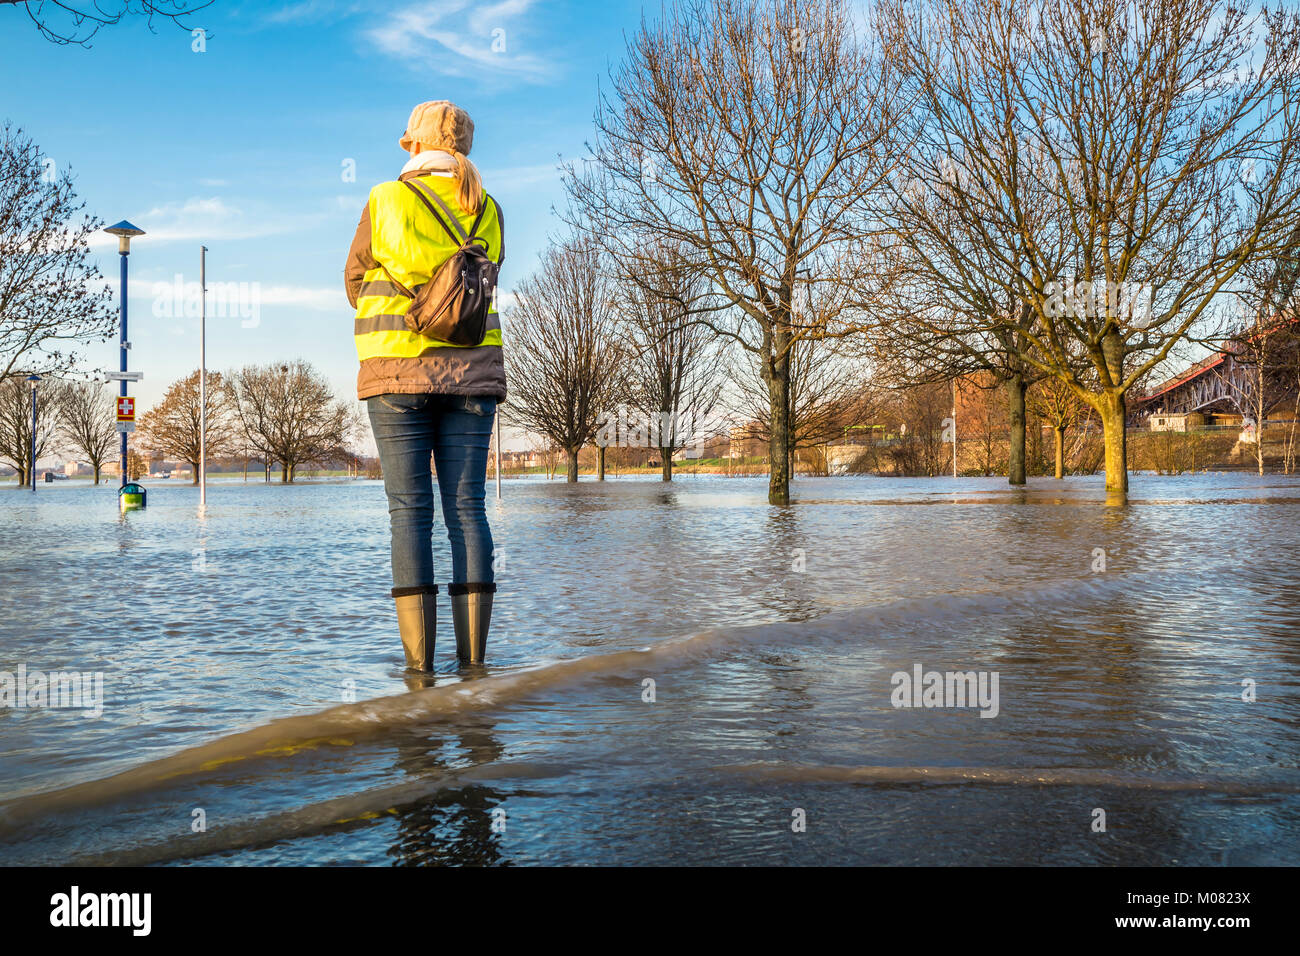 Lady standing in flooded street in wellys Stock Photo